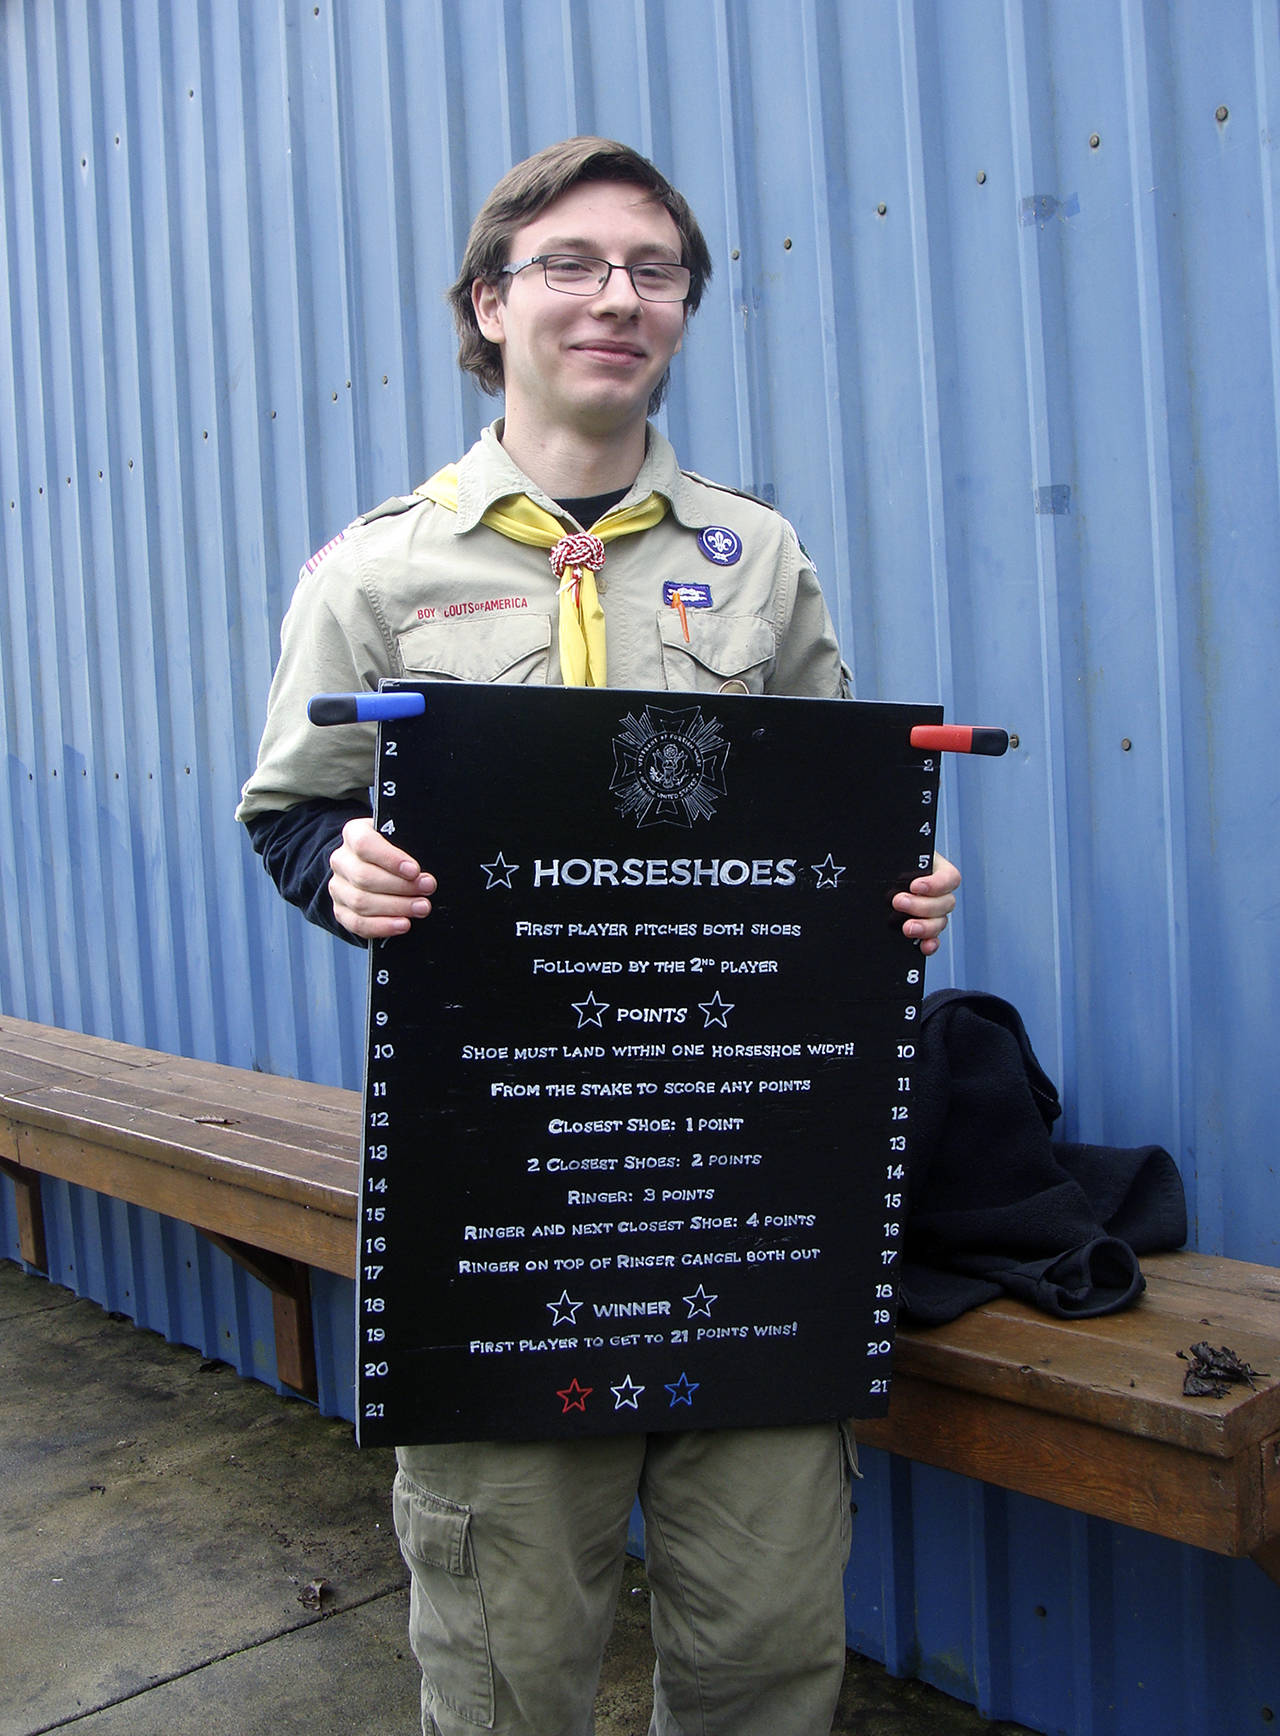 (Photo courtesy Malchert family) Daniel Malchert holds a scoring tablet that’s now posted at the horseshoe pits he built at VFW Memorial Park in Montesano.